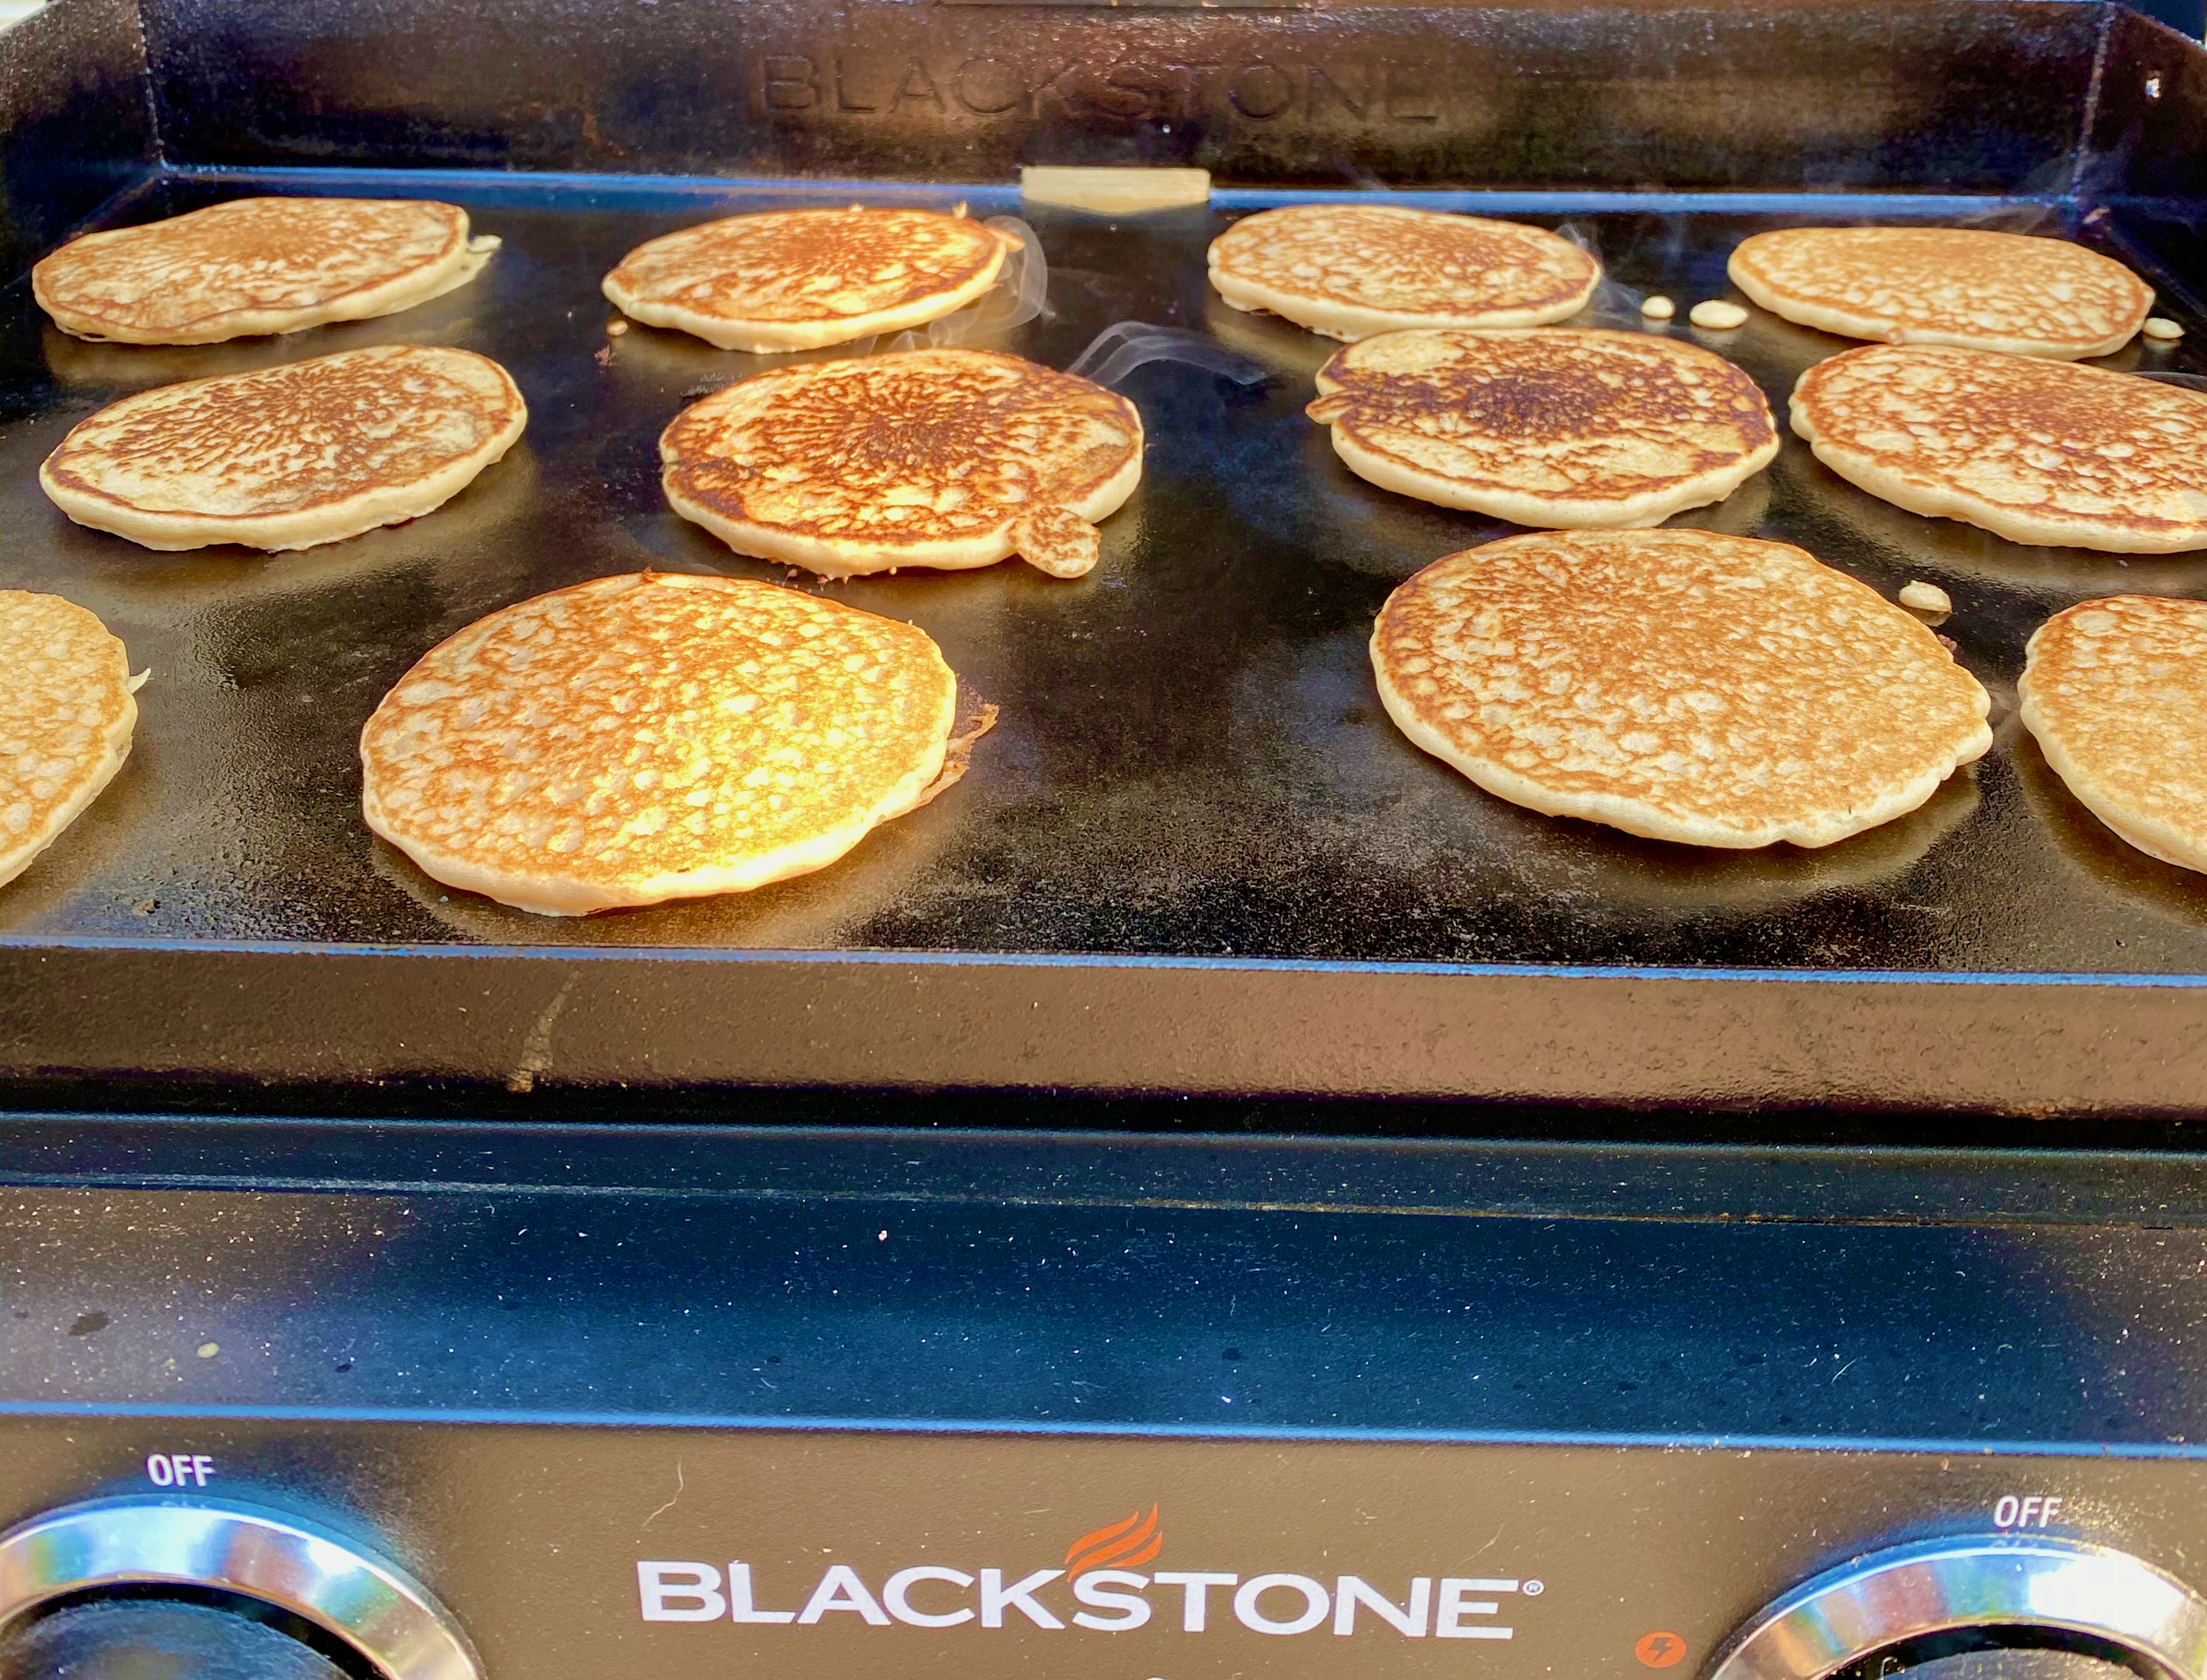 The Best Pancakes on the Griddle - Favorite Blackstone Pancakes